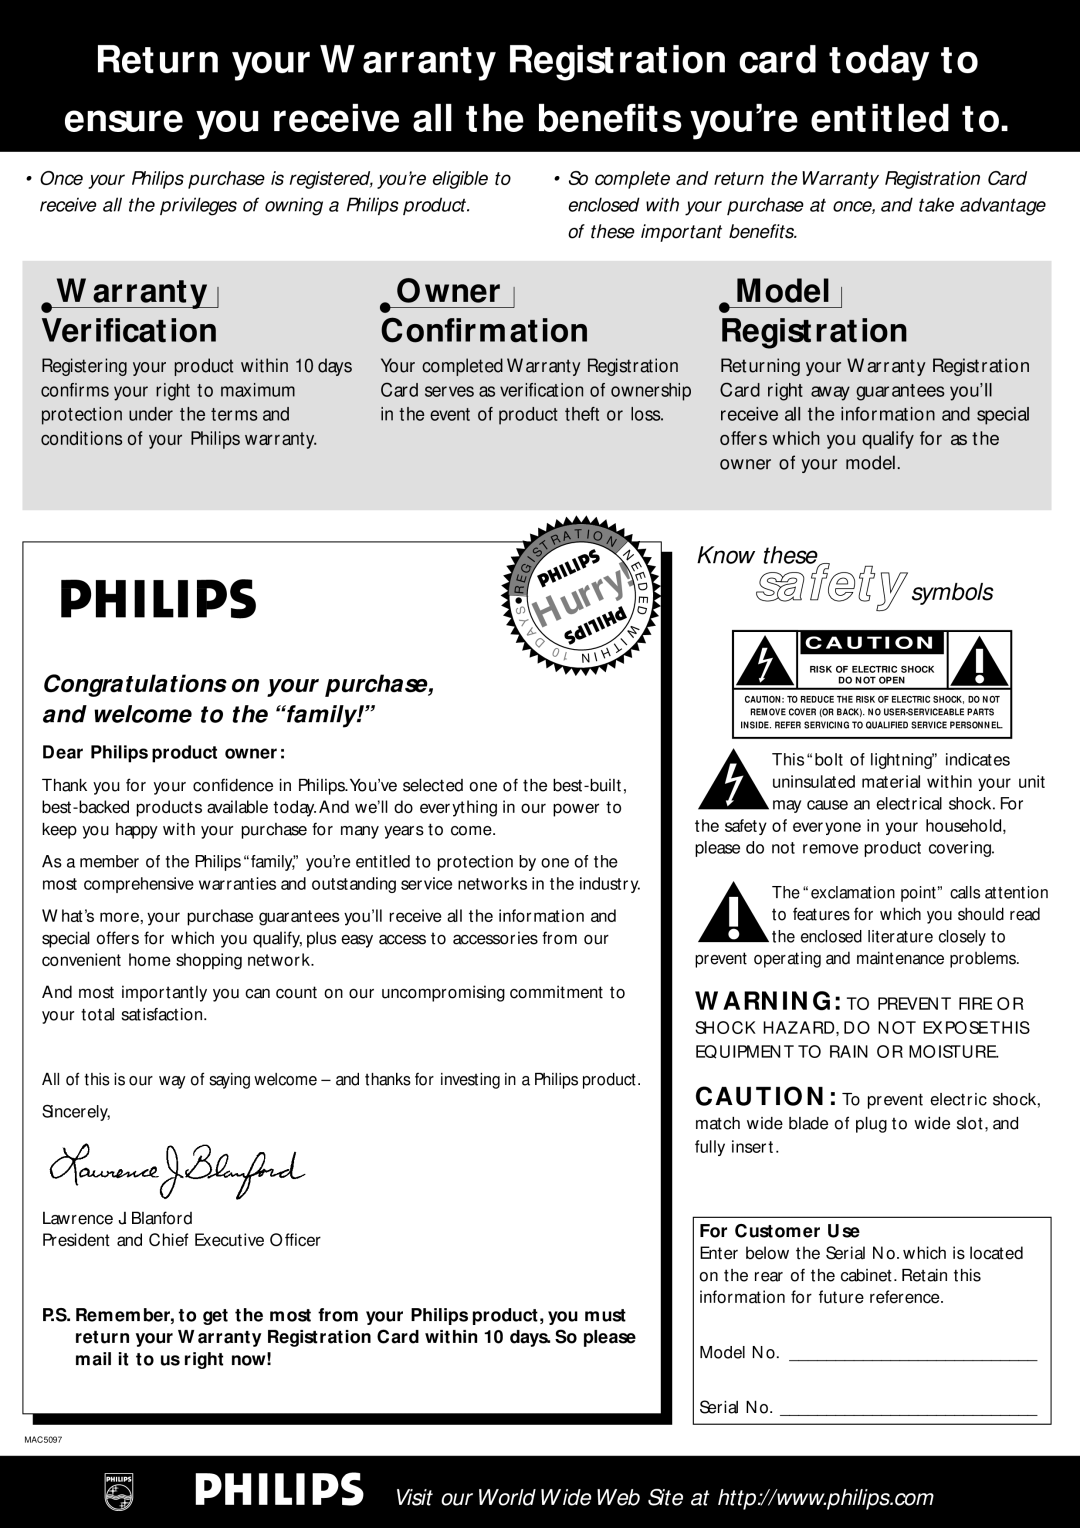 Philips LX7000SA warranty Warranty Verification, Owner Confirmation, Model Registration, Hurry, Know these safety symbols 